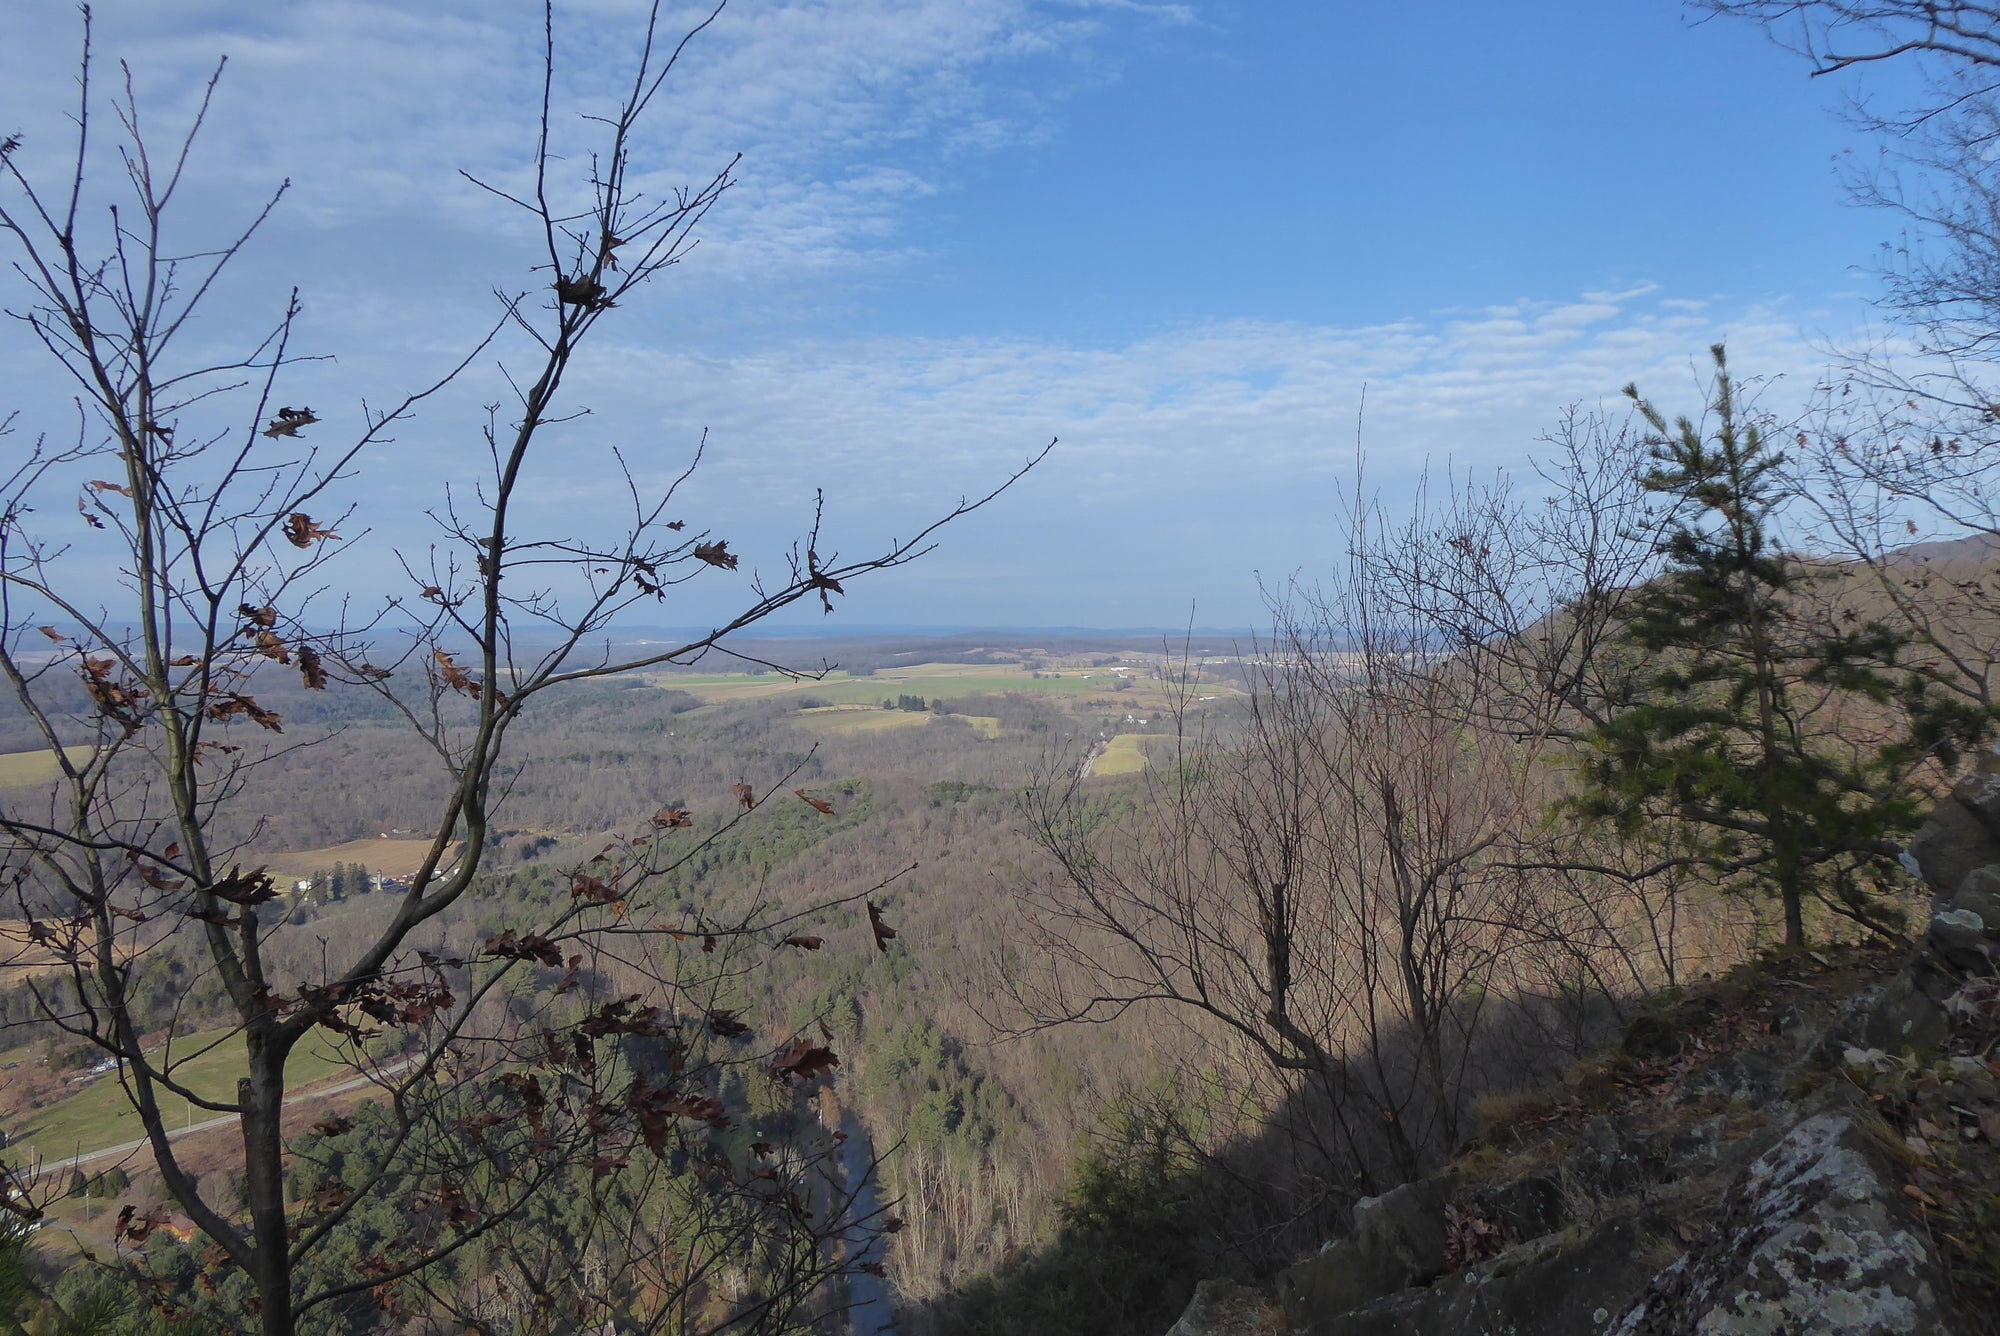 Yellow Arrow Trail: A Hike With A View In Spruce Creek, PA